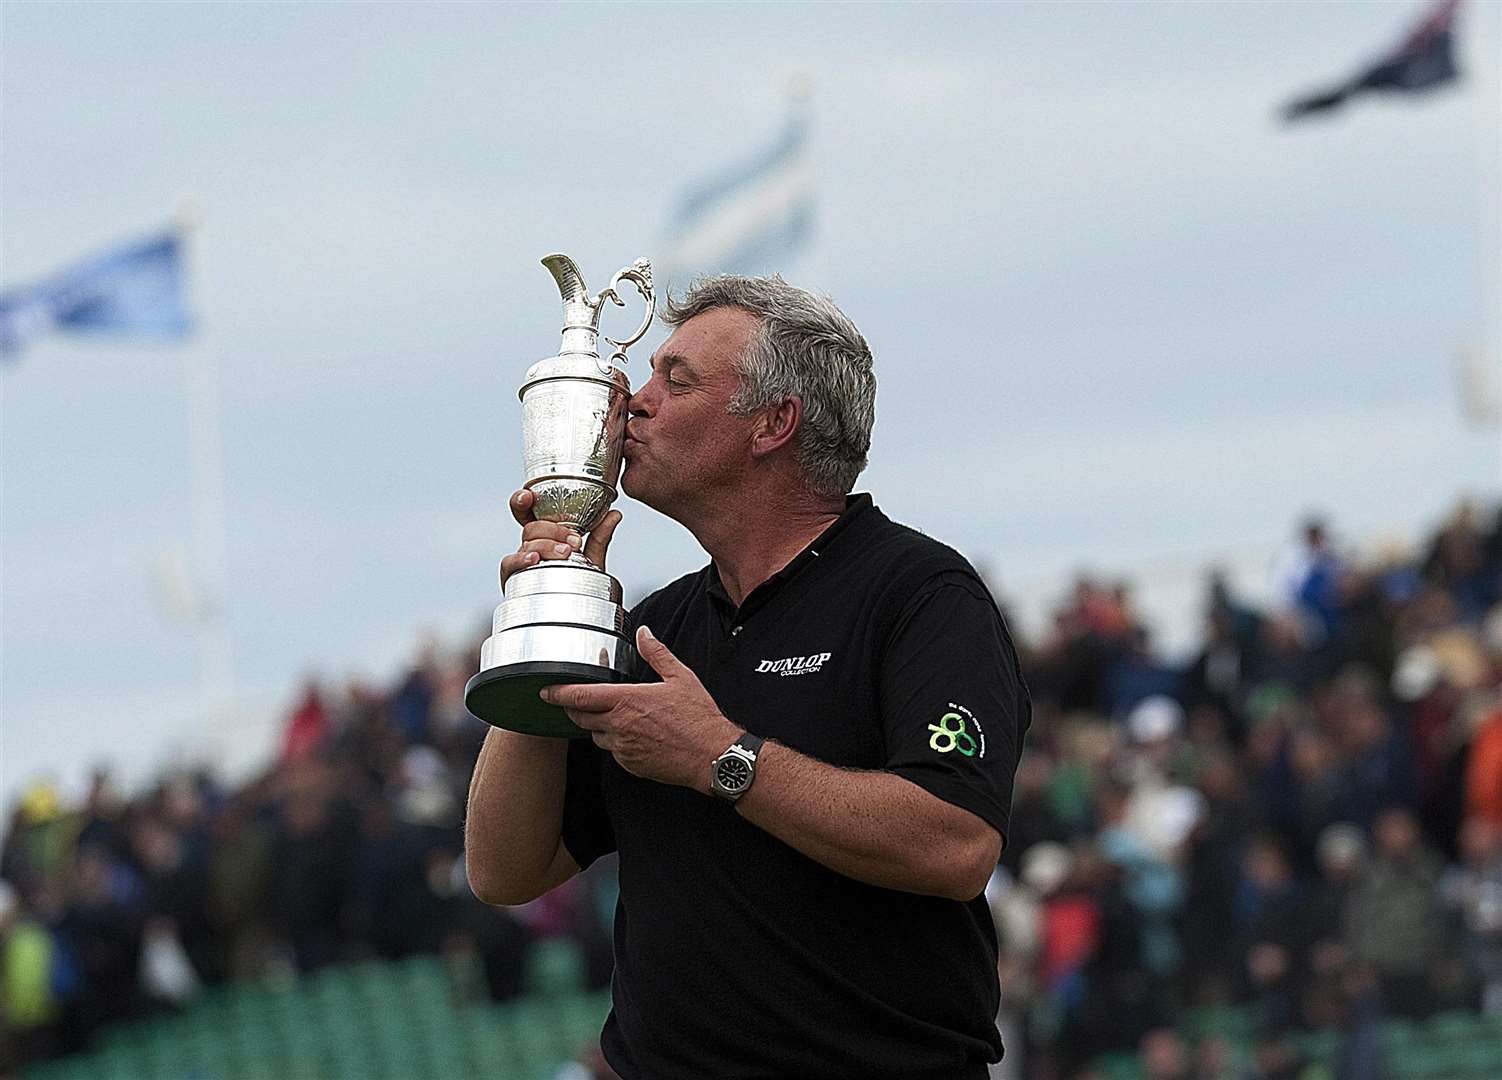 Darren Clarke - winner of The Open 2011 at Royal St George's. Picture: Barry Goodwin